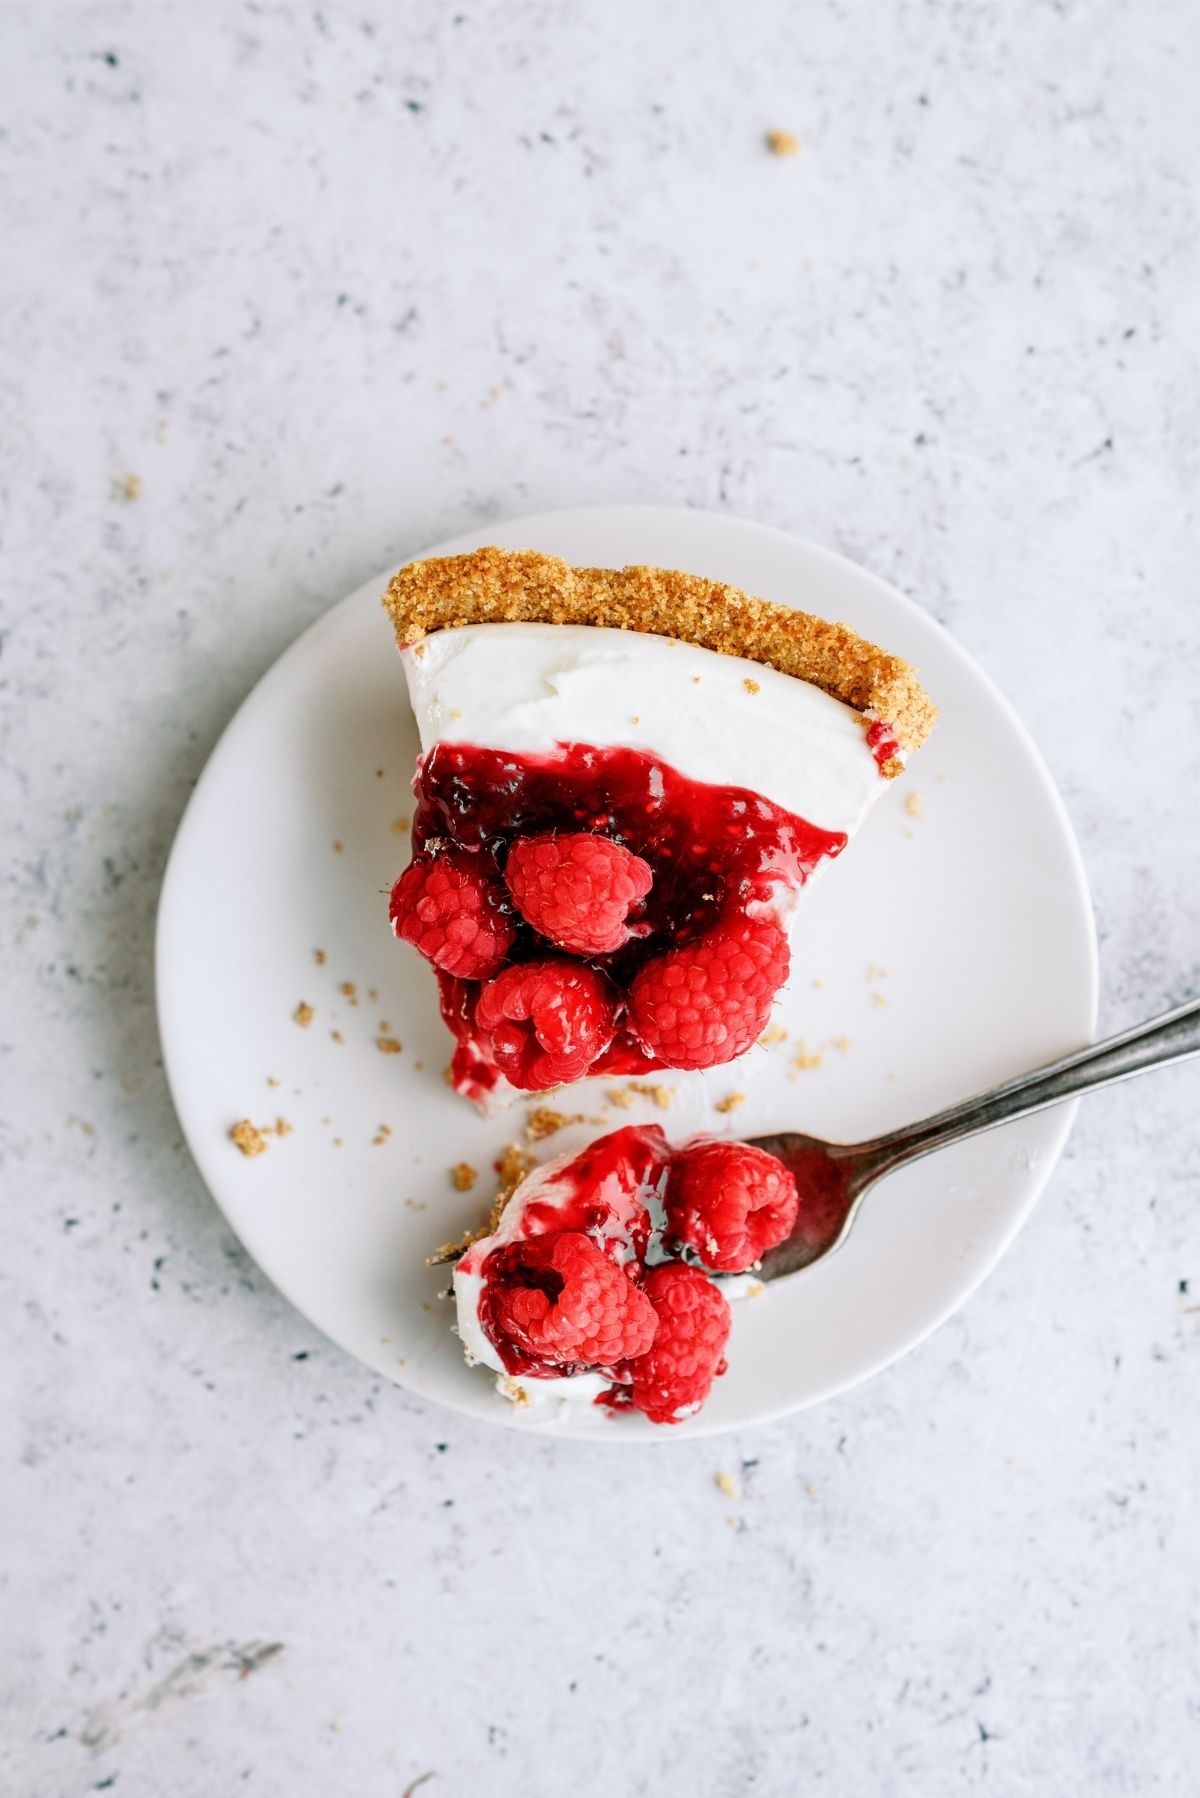 Slice of Raspberry Cream Cheese Pie on a plate with a fork